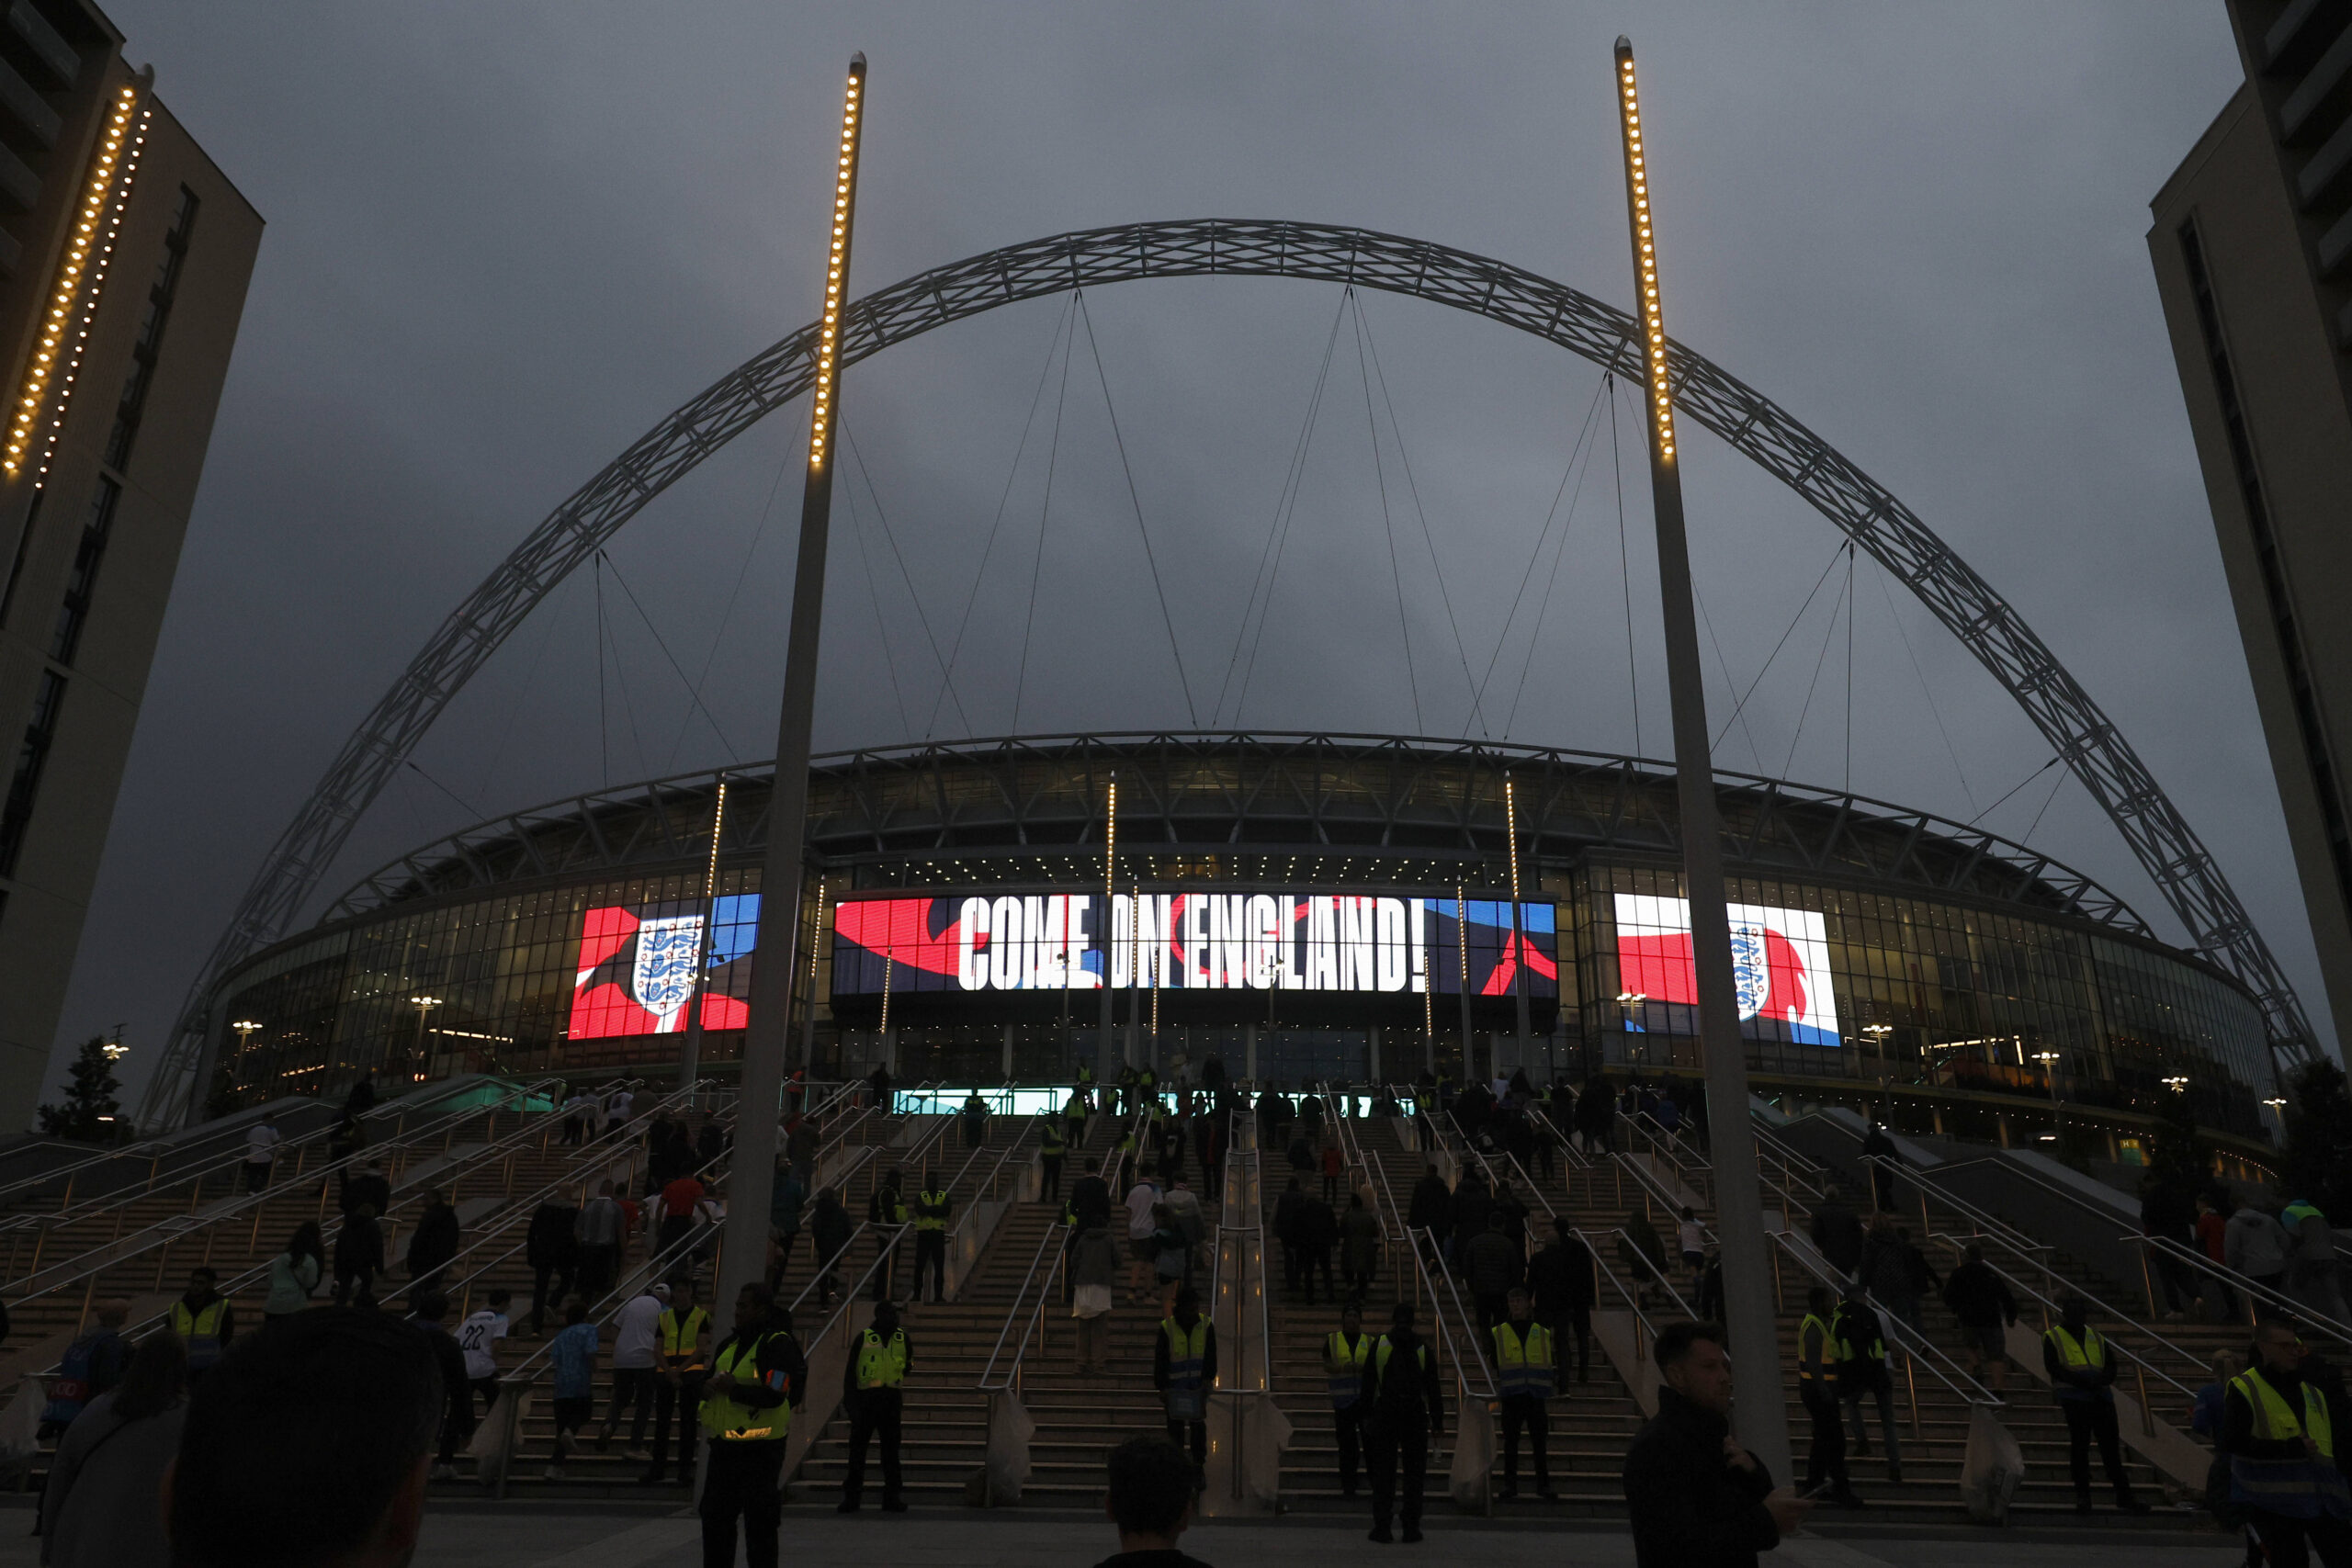 Image of Wembley Stadium ahead of an England match